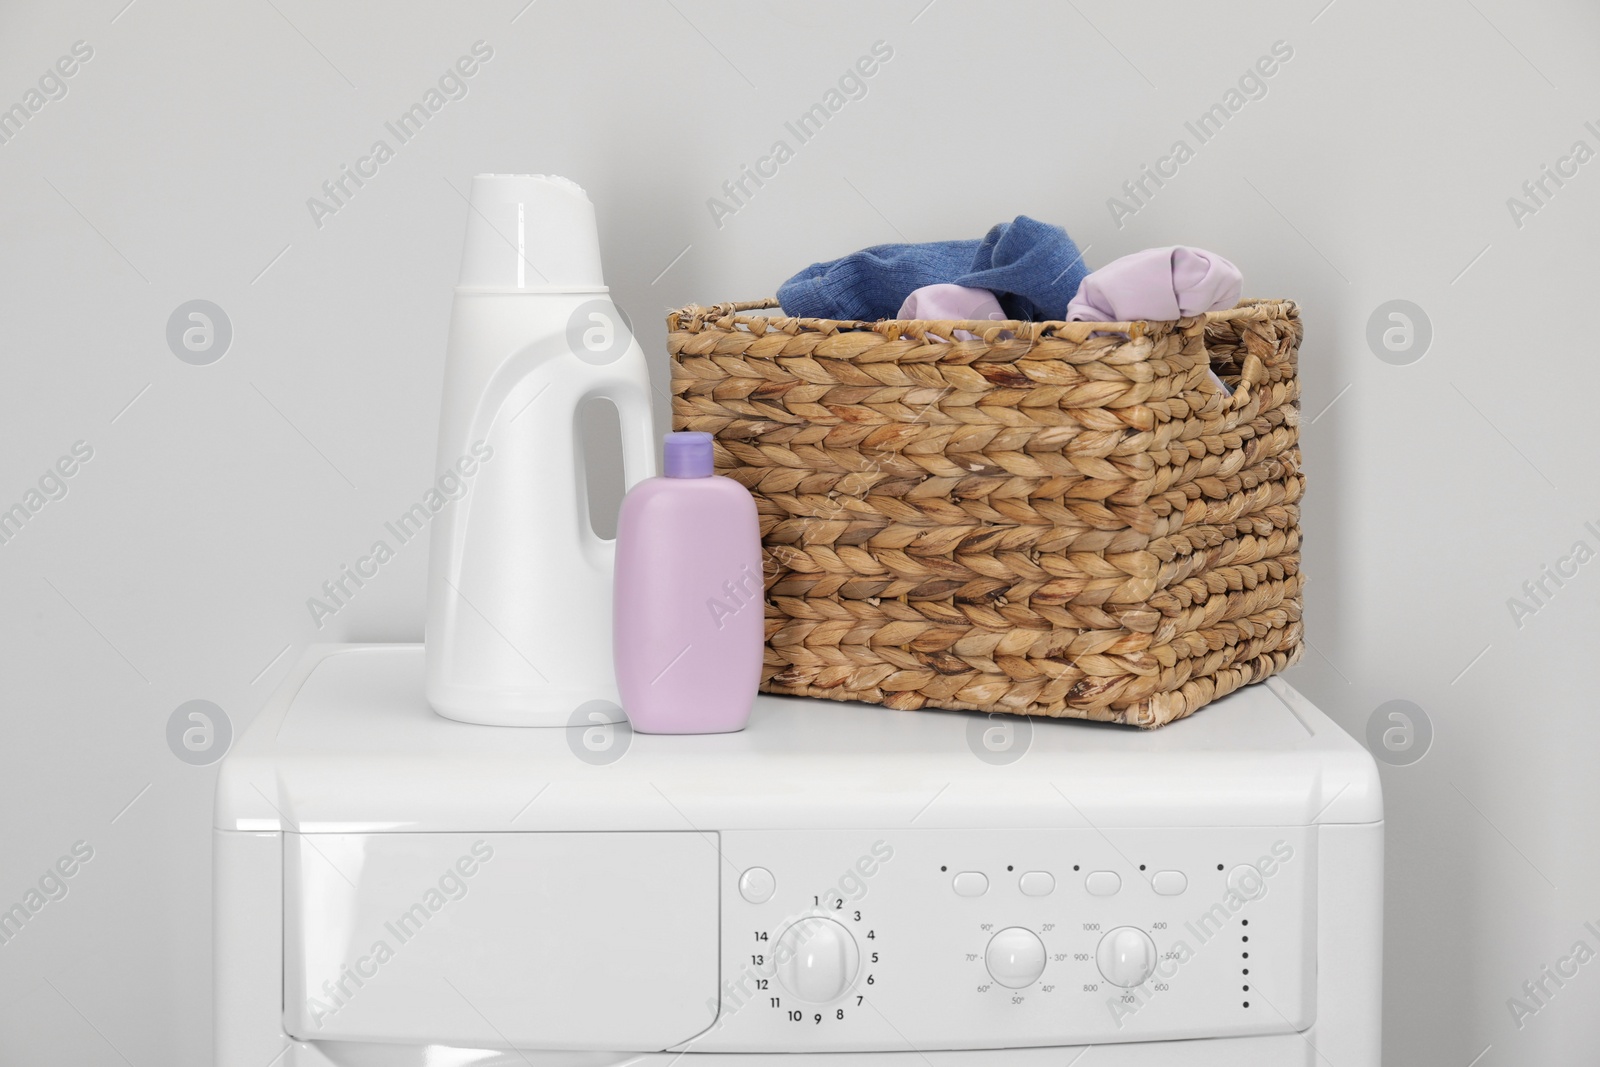 Photo of Baby clothes in wicker basket and laundry detergents on washing machine near light wall